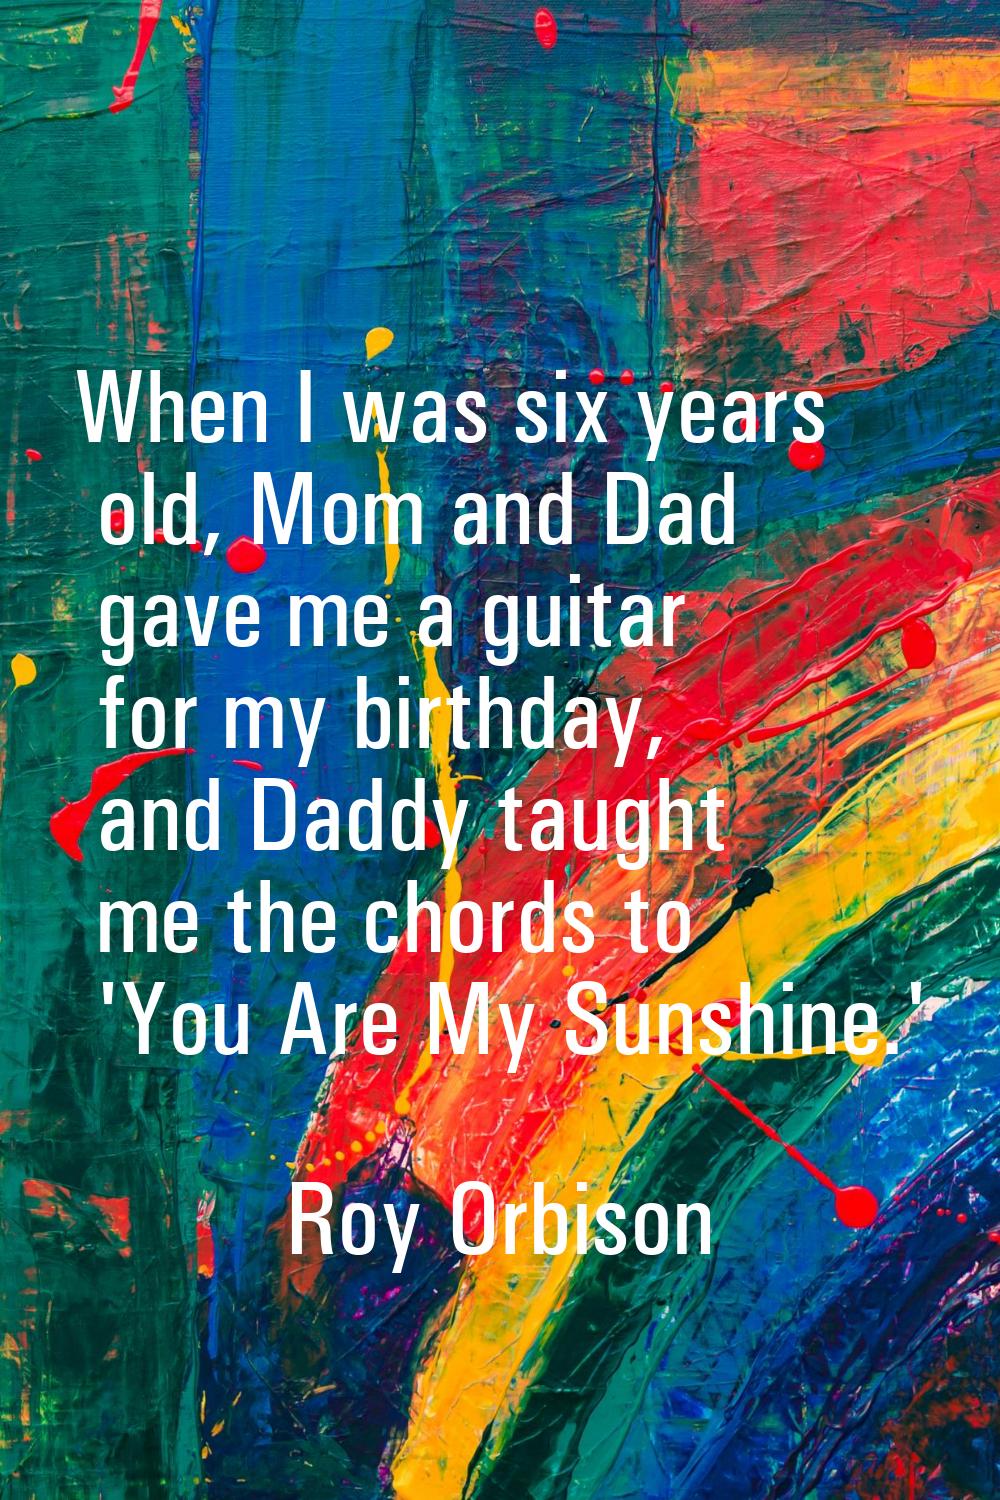 When I was six years old, Mom and Dad gave me a guitar for my birthday, and Daddy taught me the cho